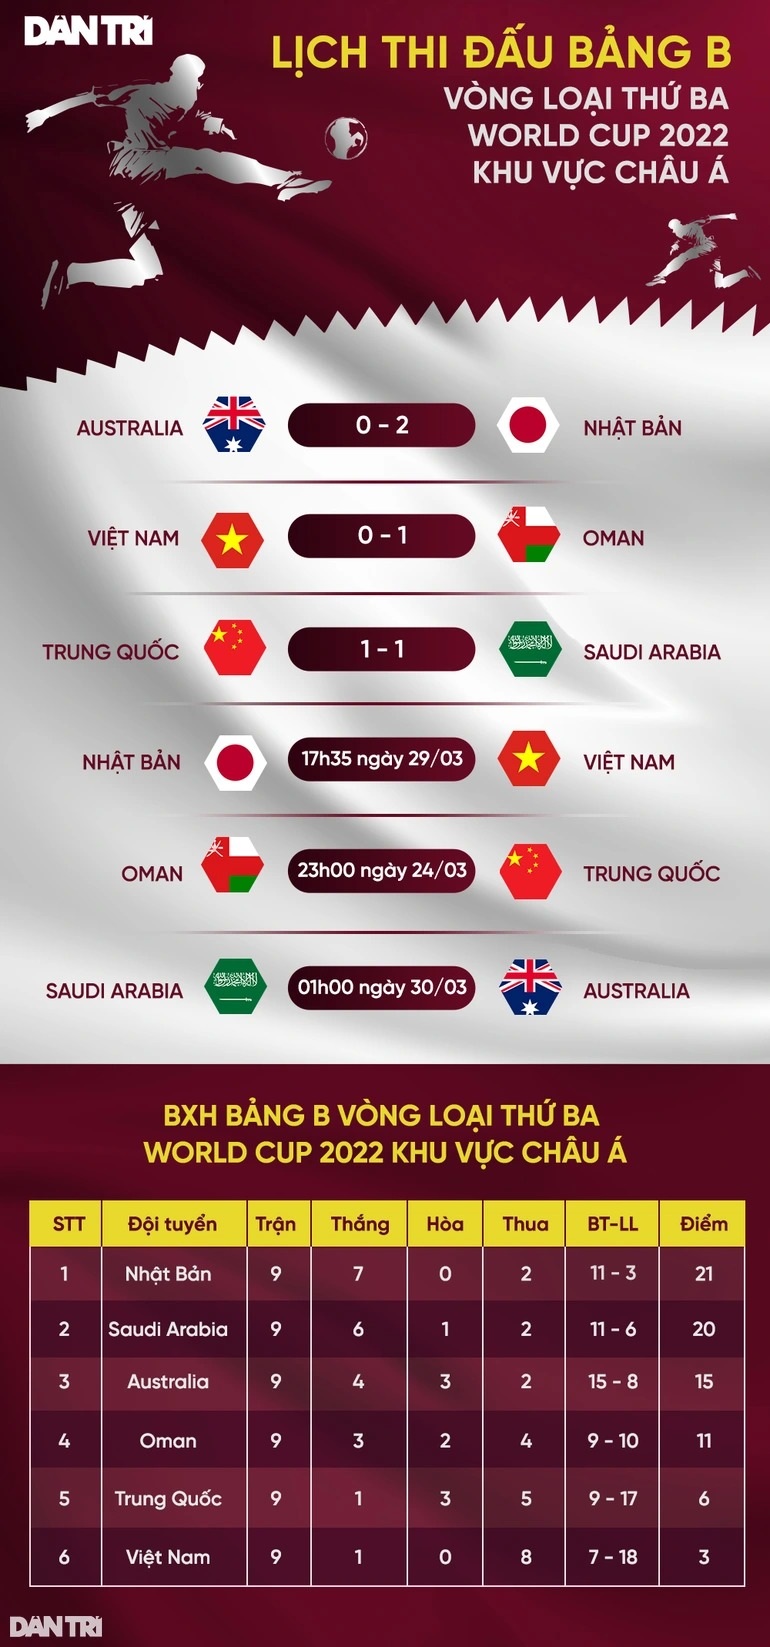 Quang Hai: The Vietnamese team will play well against Japan - 3